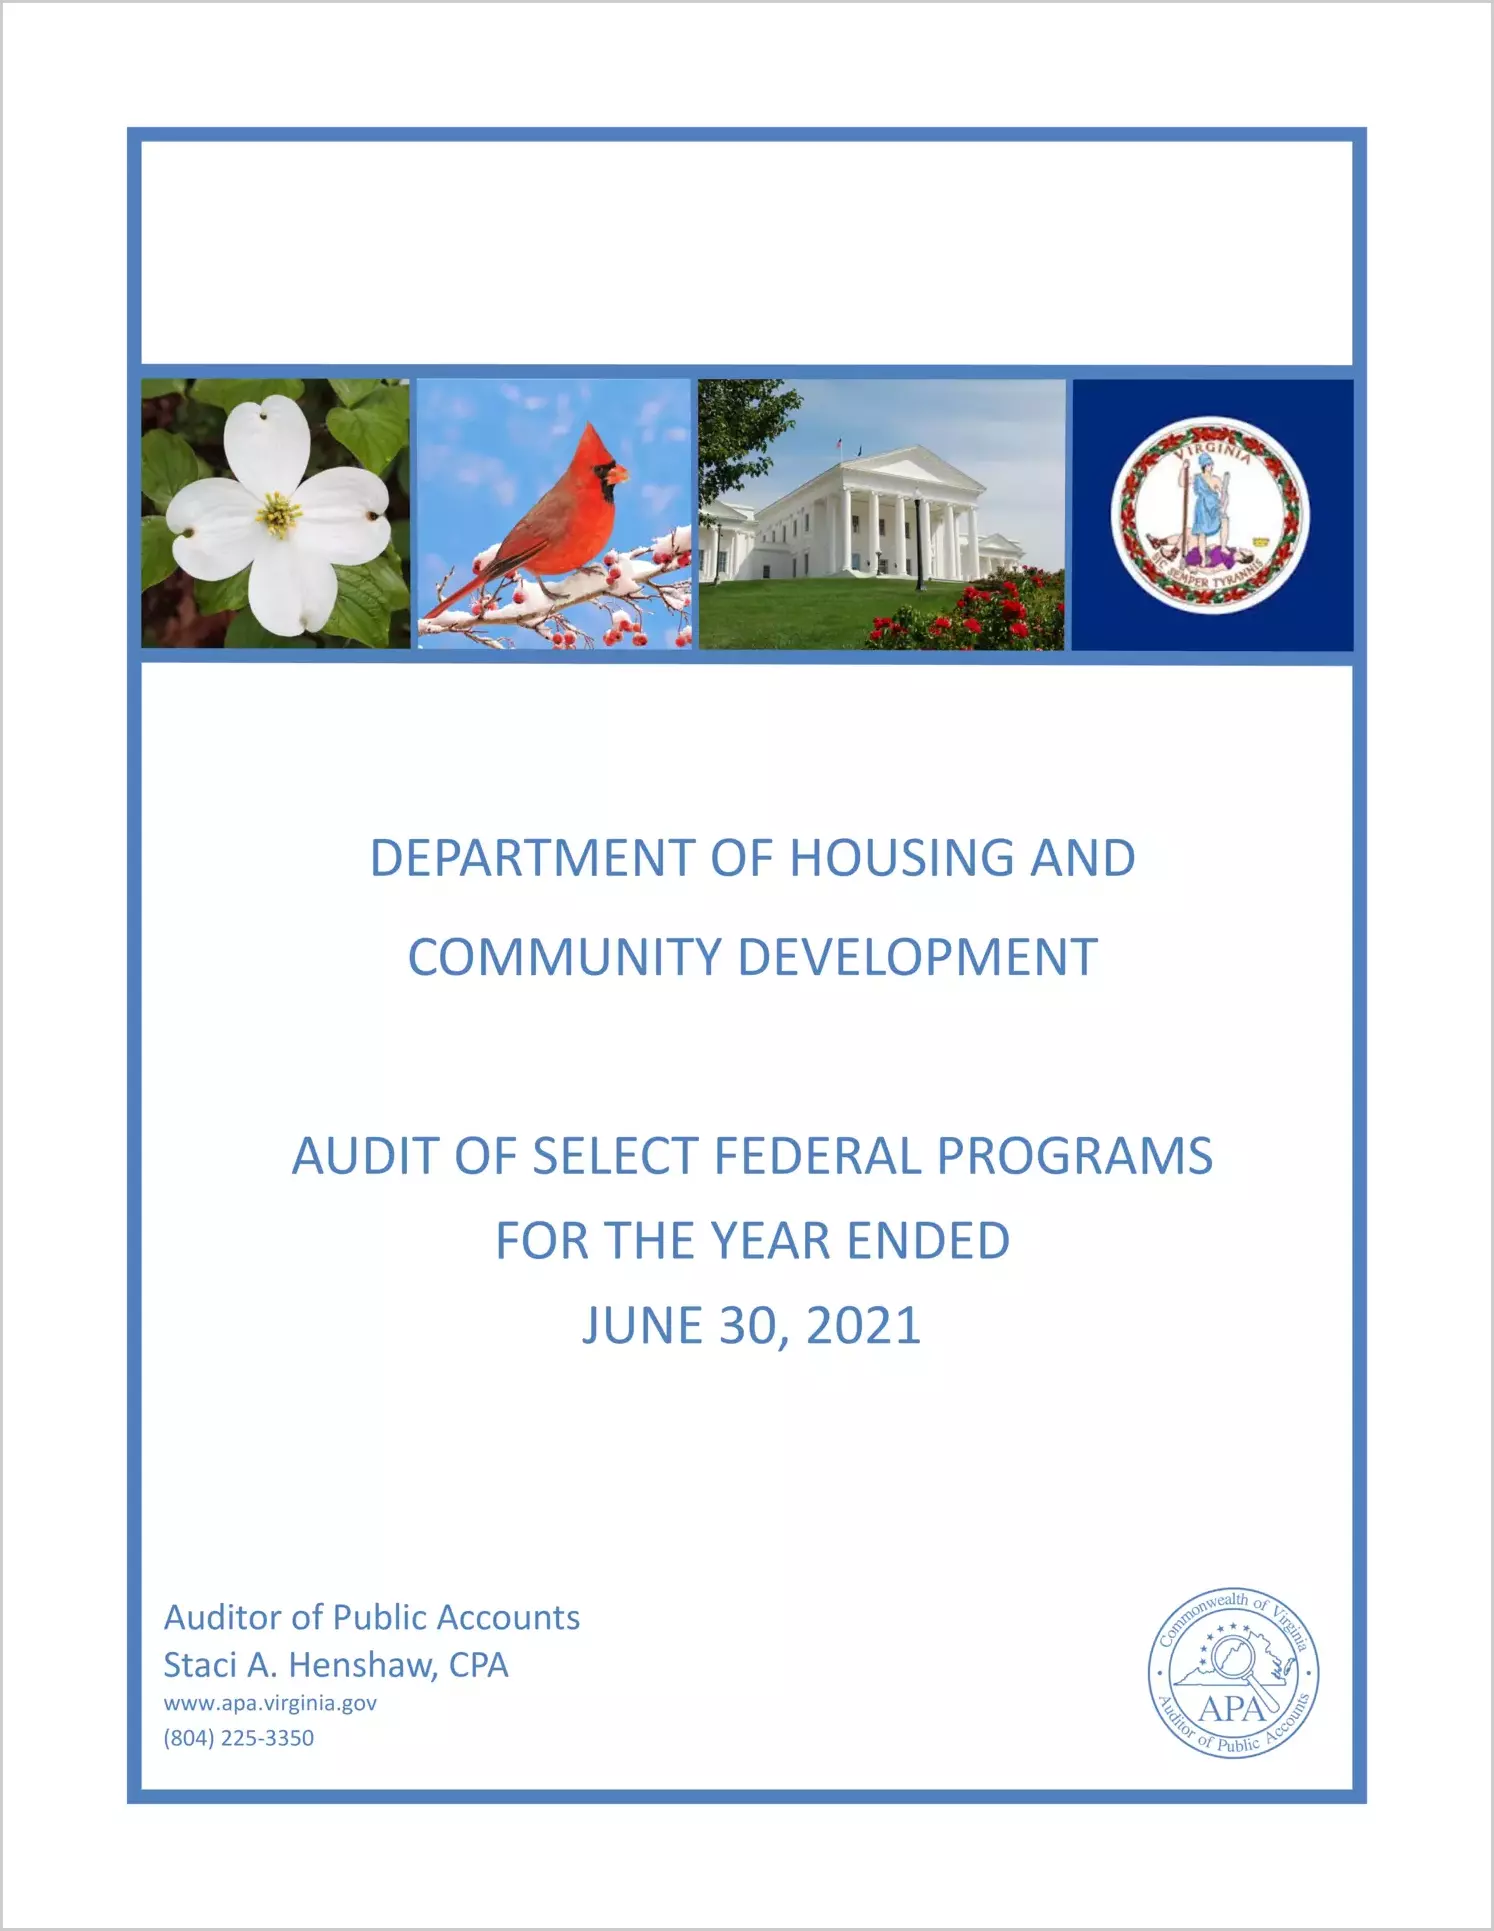 Department of Housing and Community Development audit of Select Federal Programs for the year ended June 30, 2021